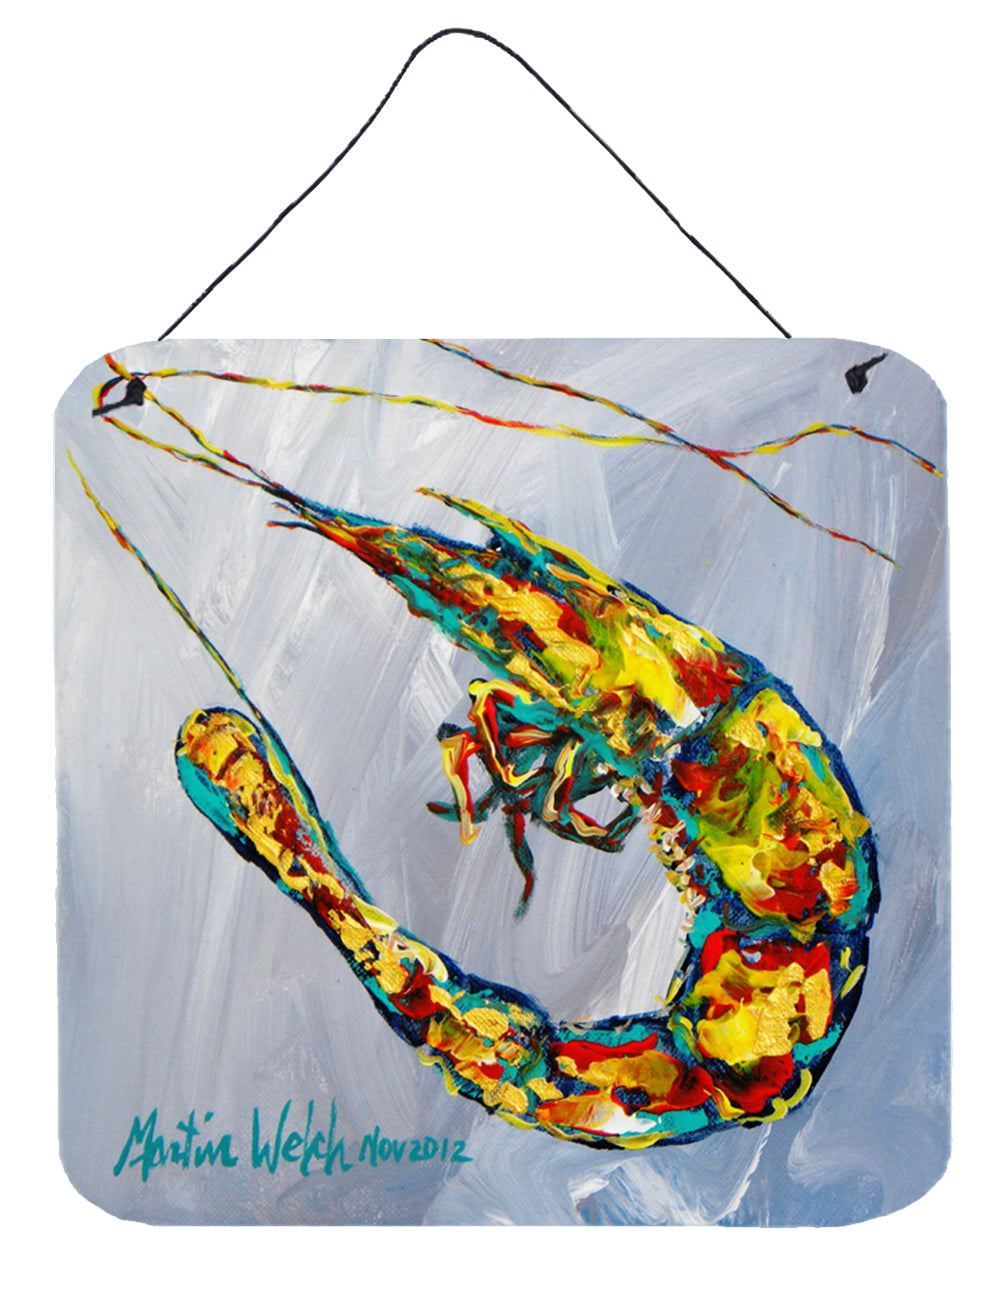 Buy this Shrimp Iced Shrimp Wall or Door Hanging Prints